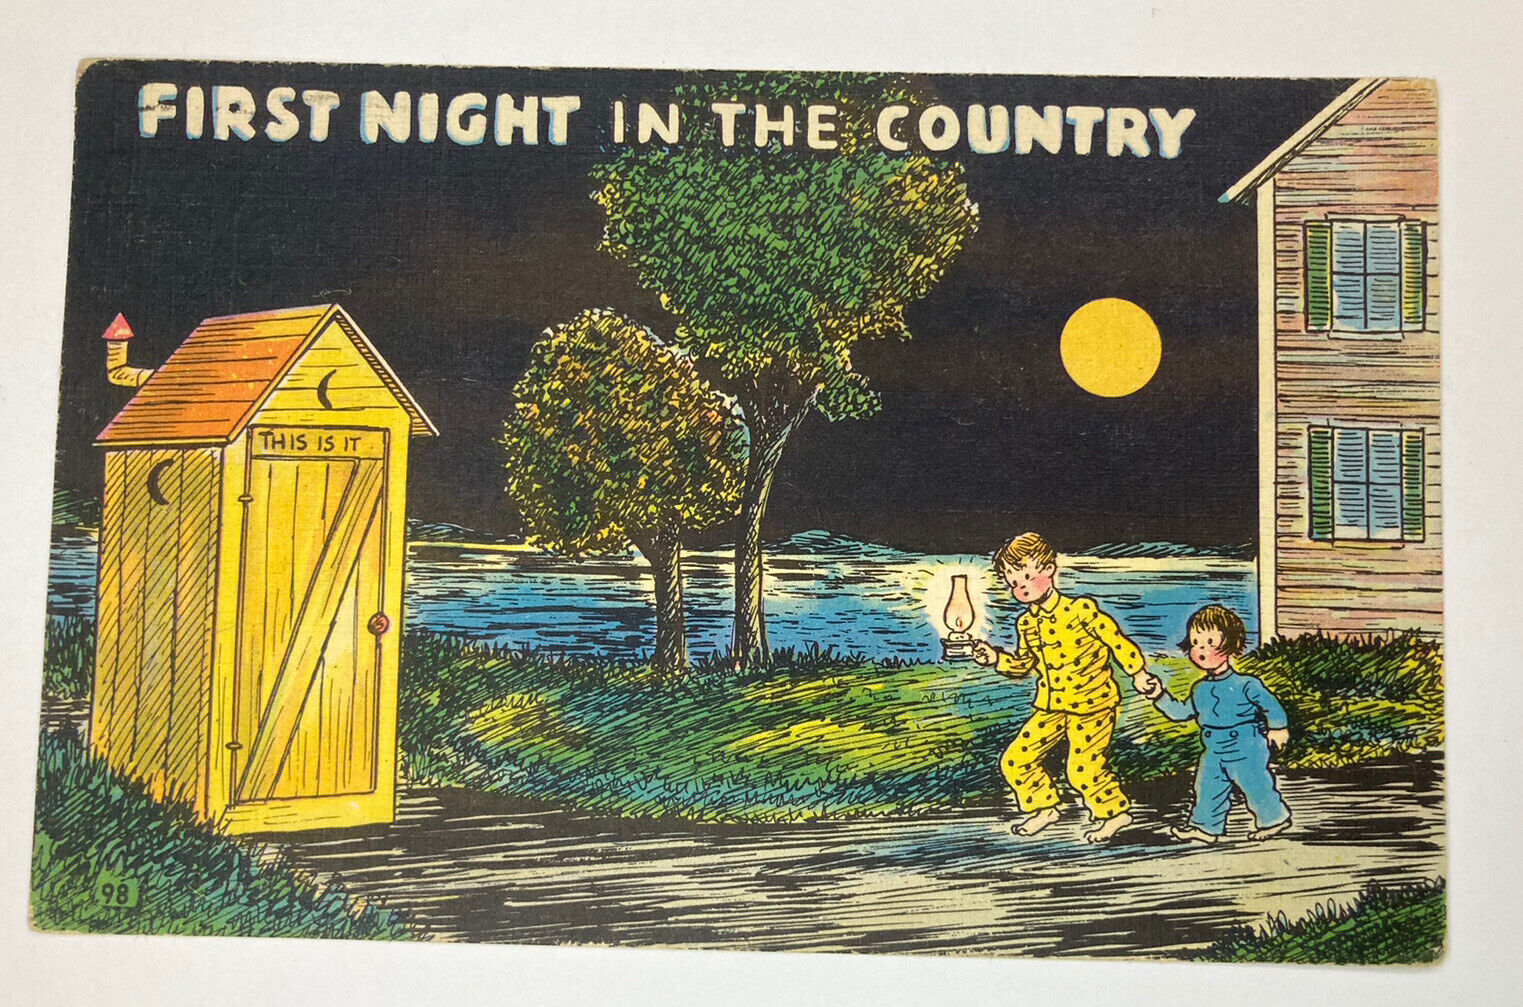 c1953 First Night In The Country VINTAGE Linen Comic Postcard